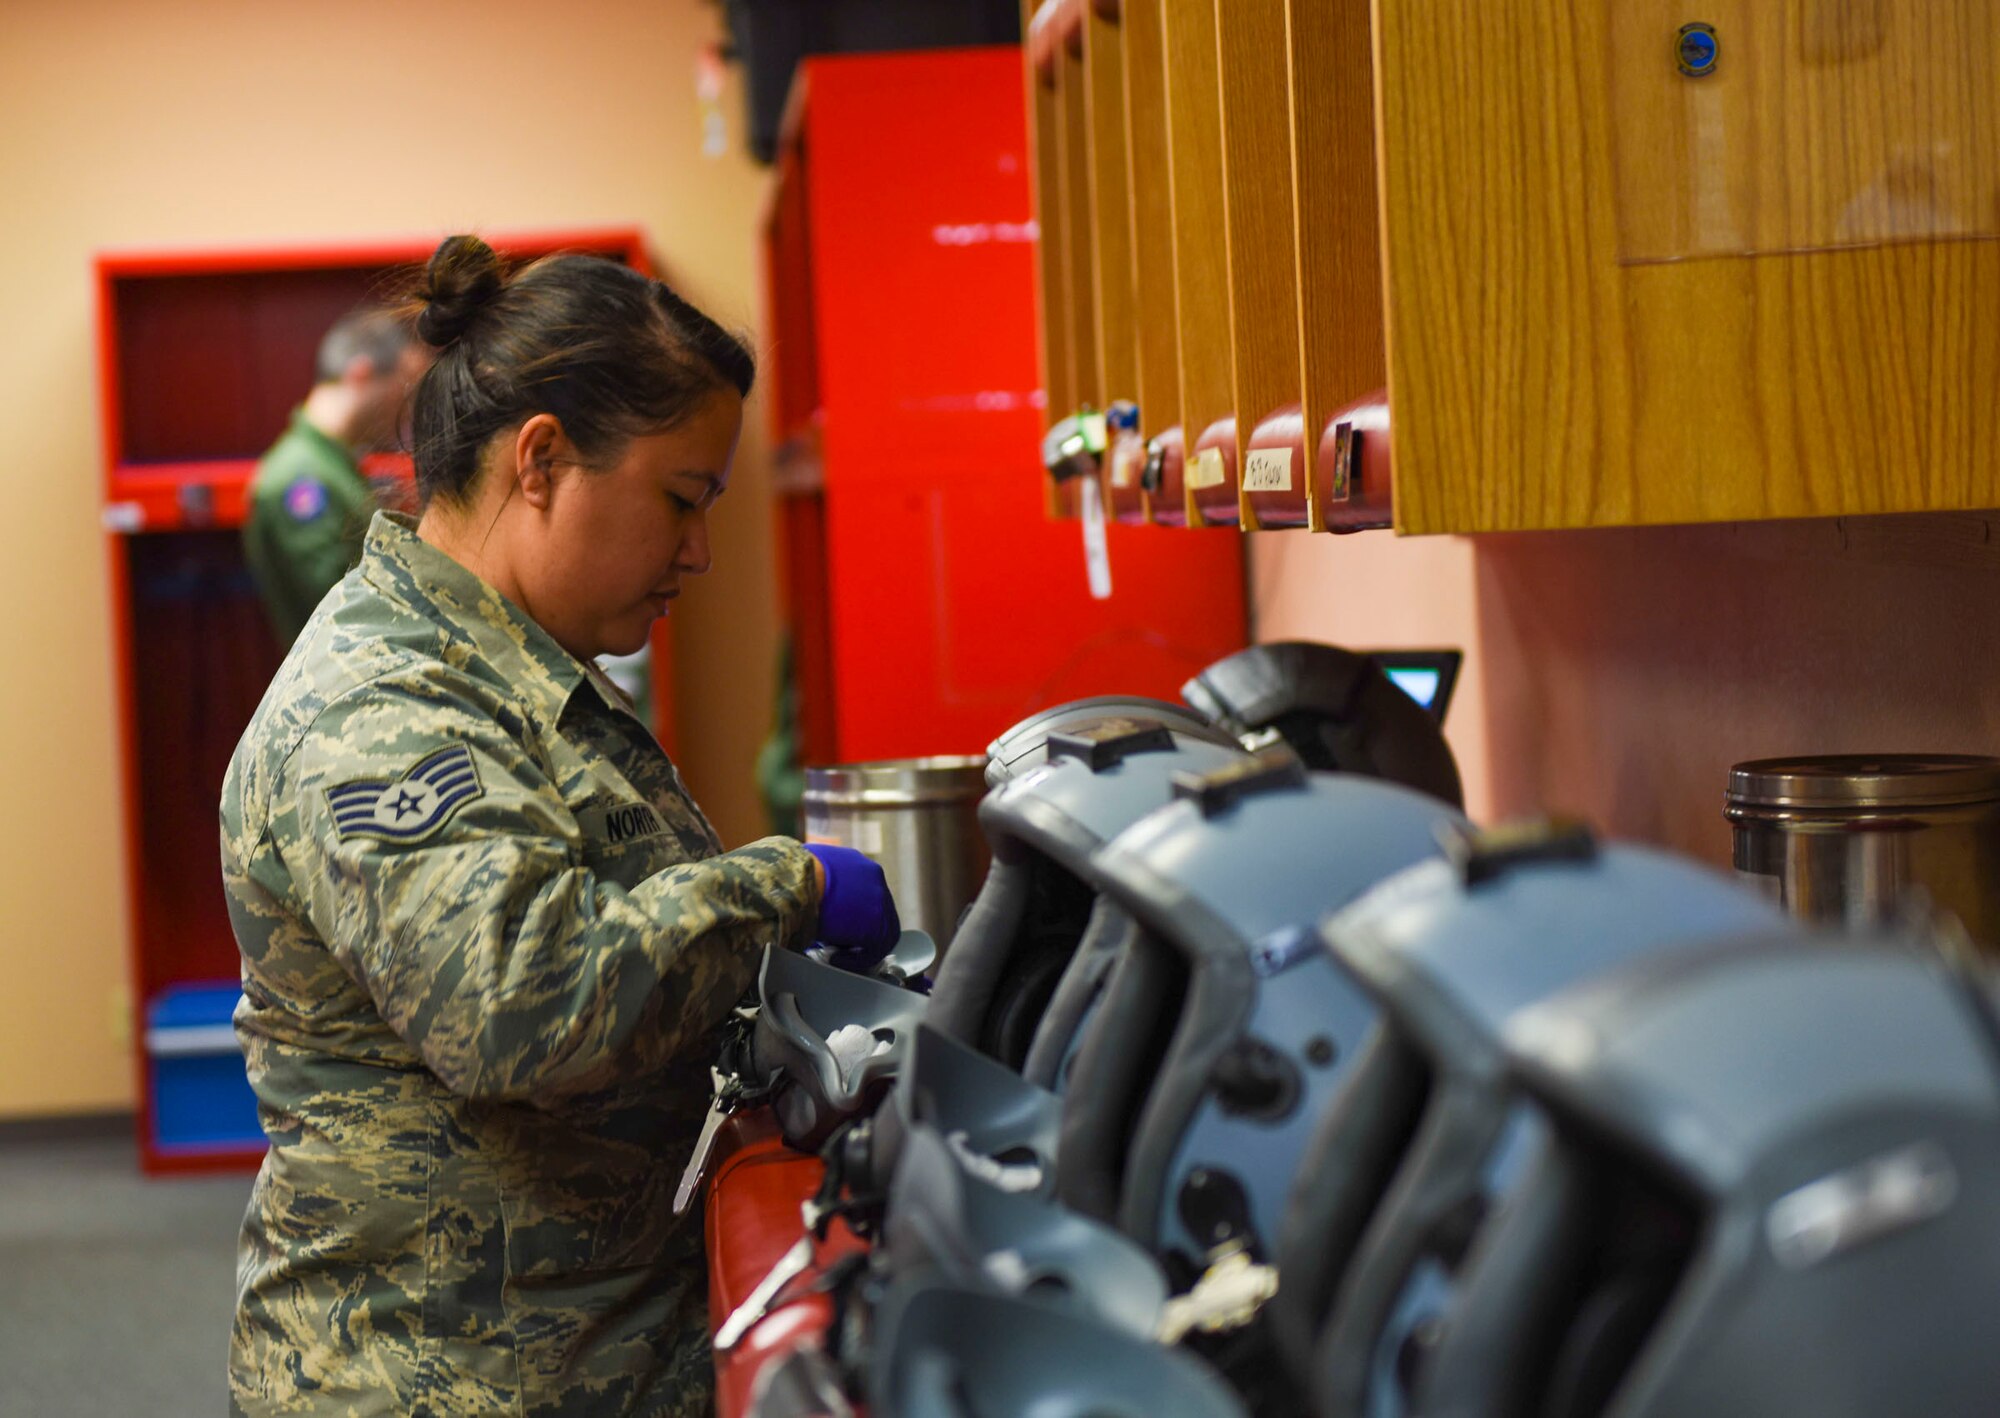 Staff Sgt. Anna North, 366th Operations Support Squadron aircrew flight equipment journeyman, cleans helmets at Mountain Home Air Force Base, Idaho. Airmen from Aircrew Flight Equipment are responsible for inspecting flight equipment such as protective clothing, flotation equipment, emergency evacuation systems and parachutes. (U.S. Air Force photo by Airman Alaysia Berry/RELEASED)